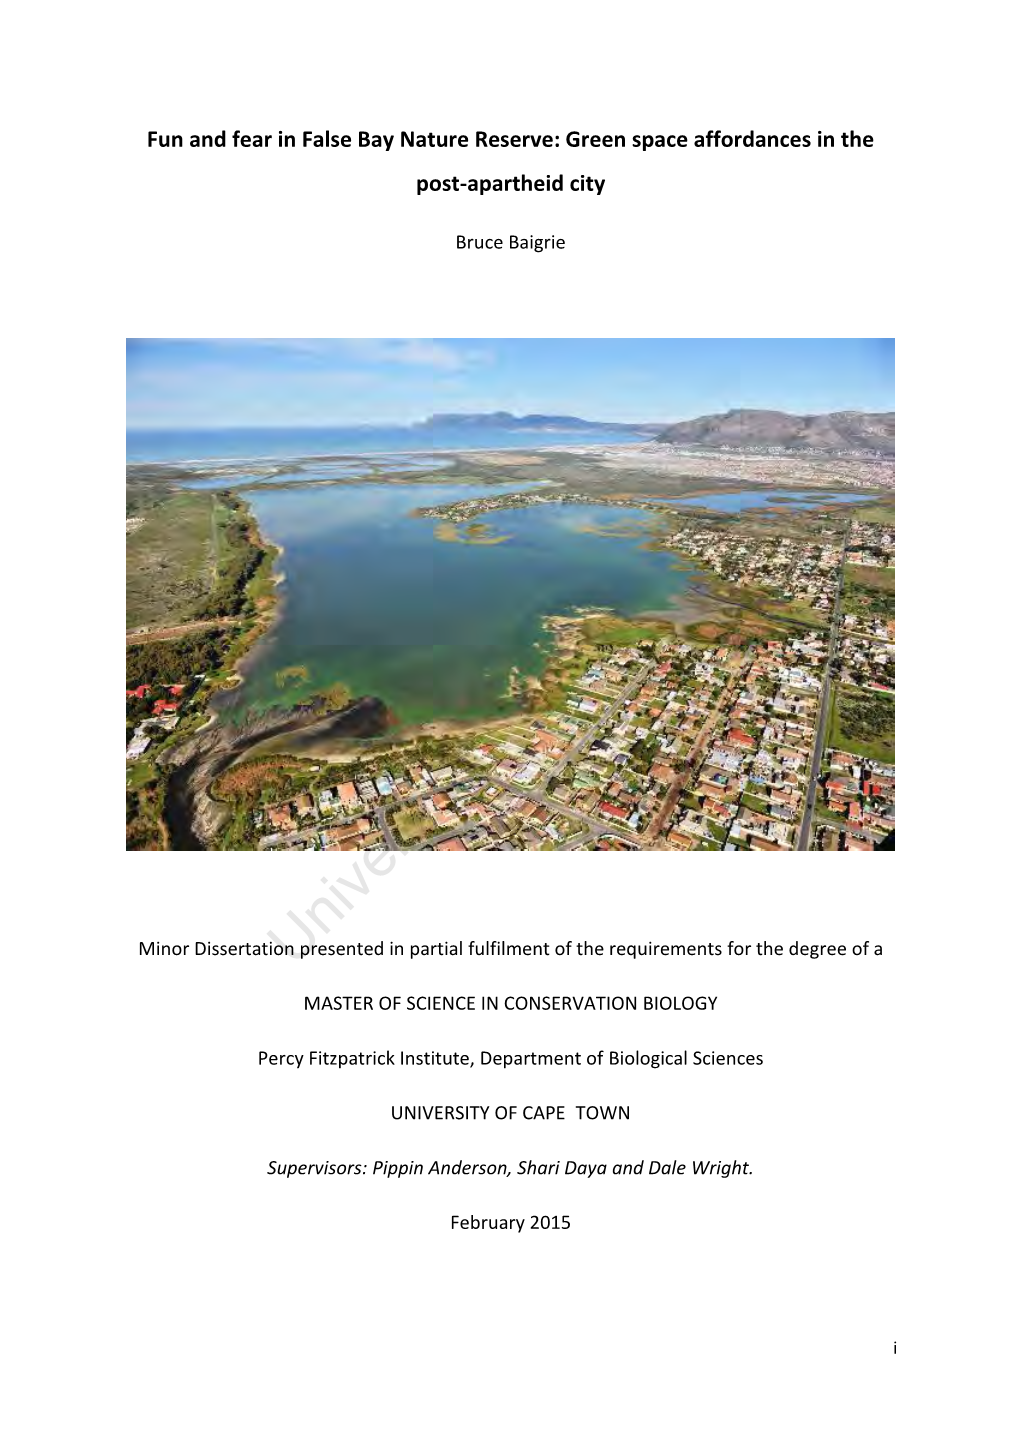 Fun and Fear in False Bay Nature Reserve: Green Space Affordances in the Post-Apartheid City